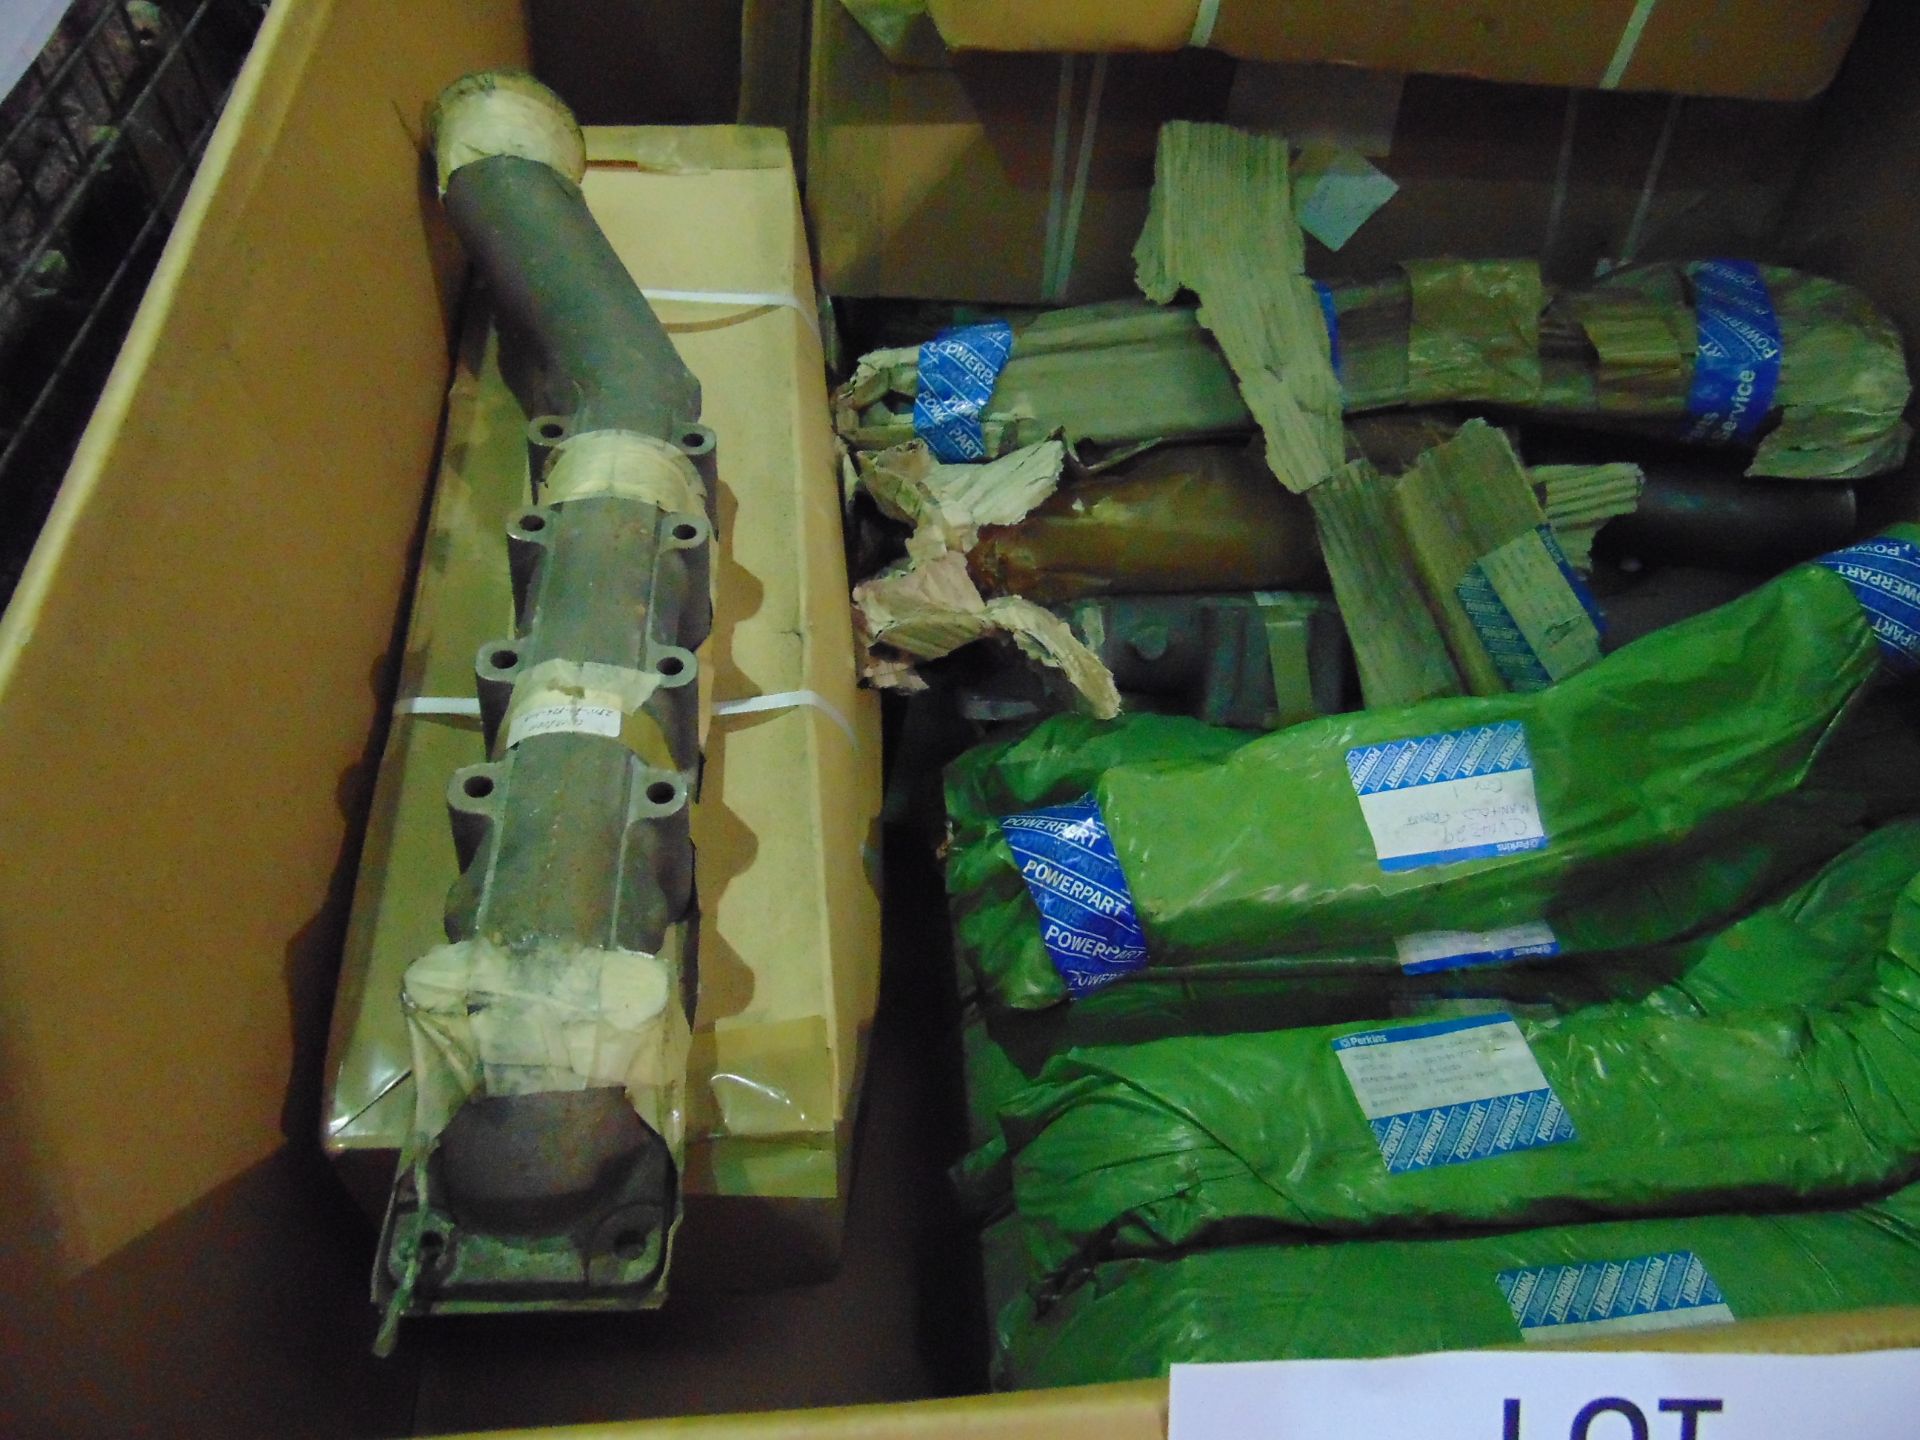 30x Perkins Manifold Assembly Unused in original packing - Image 2 of 4